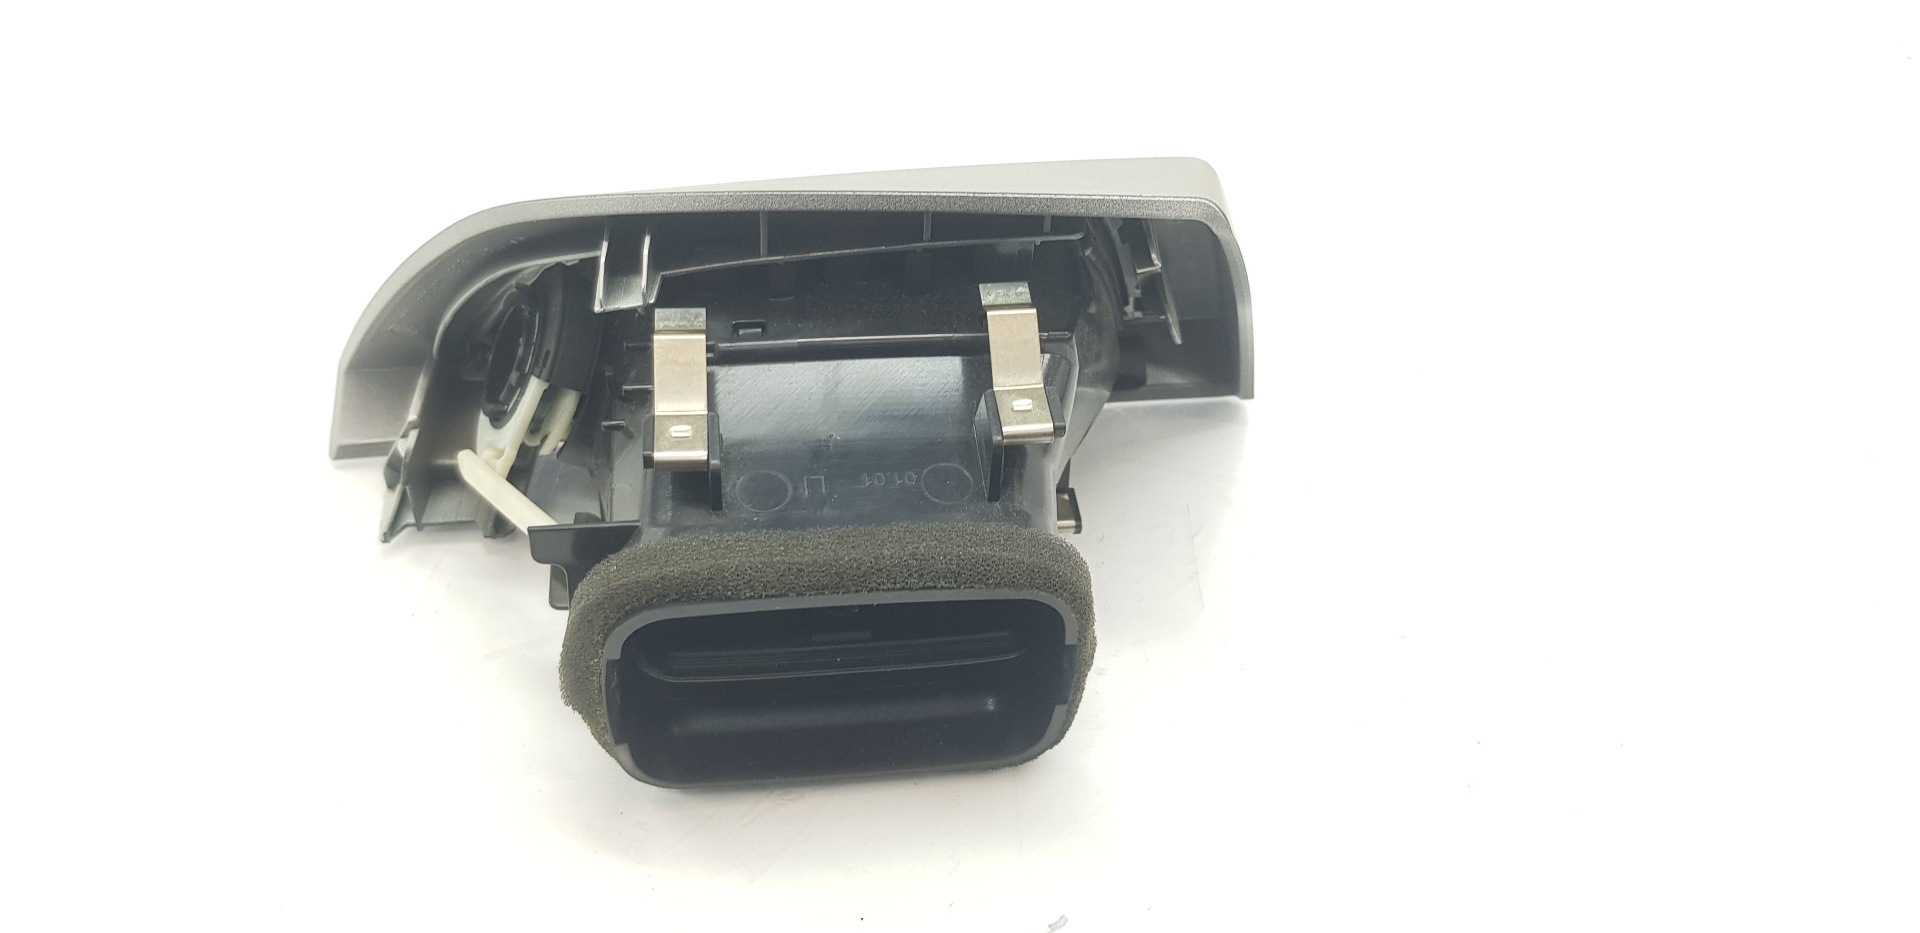 BMW 1 Series F20/F21 (2011-2020) Other Interior Parts 64229205355, 64229205355 24167481